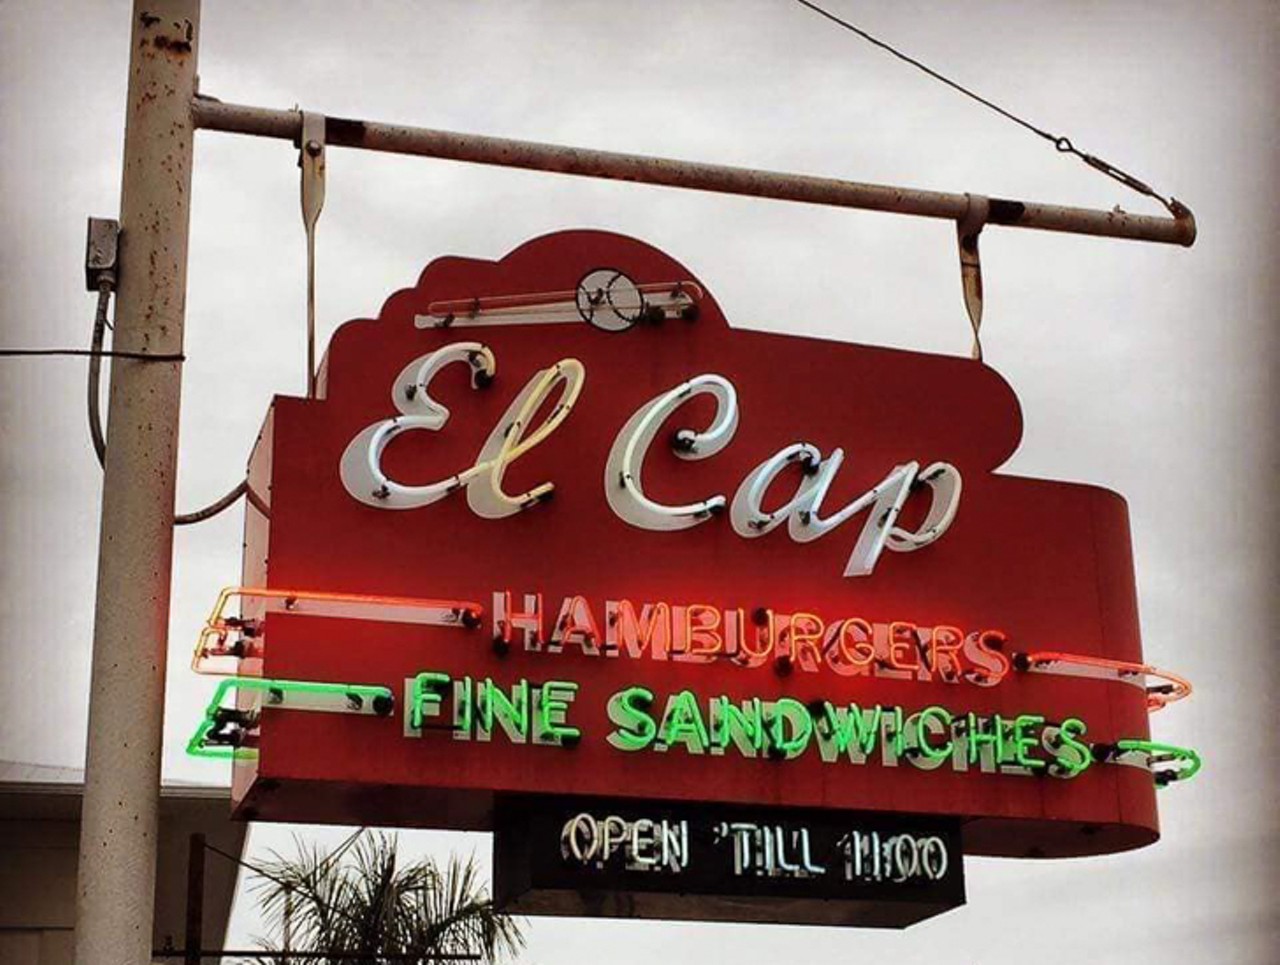 El Cap  
3500 4th St. N., St. Petersburg
This local joint is most well-known for its budget burgers, but the line on its sign touting &#147;fine sandwiches&#148; isn&#146;t a lie. Popular options include the &#147;Homer Ham Sandwich&#148; and &#147;Triple-play Bacon, Lettuce, & Tomato sandwich.&#148;
Photo via El Cap/Facebook